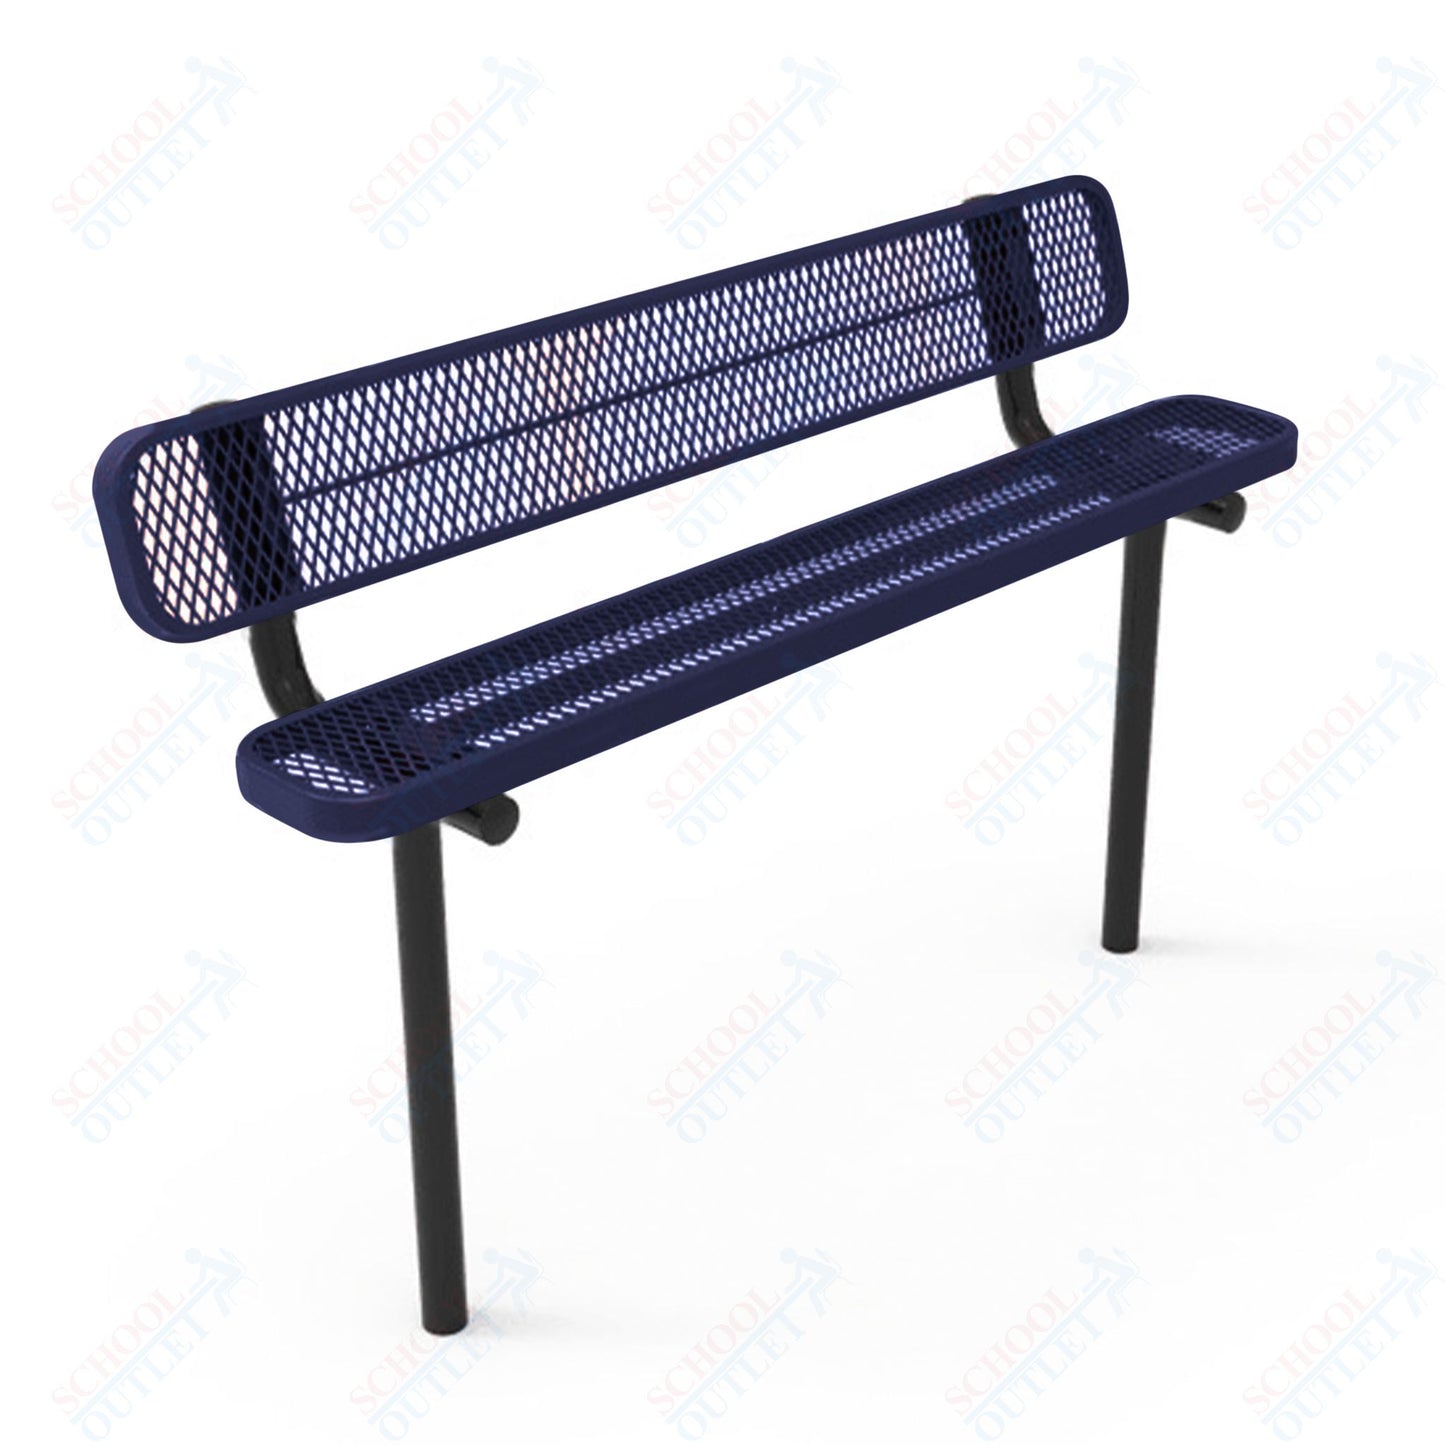 MyTcoat - Standard Outdoor Bench with Back - Inground Mount 4' L (MYT-BRT04-19)